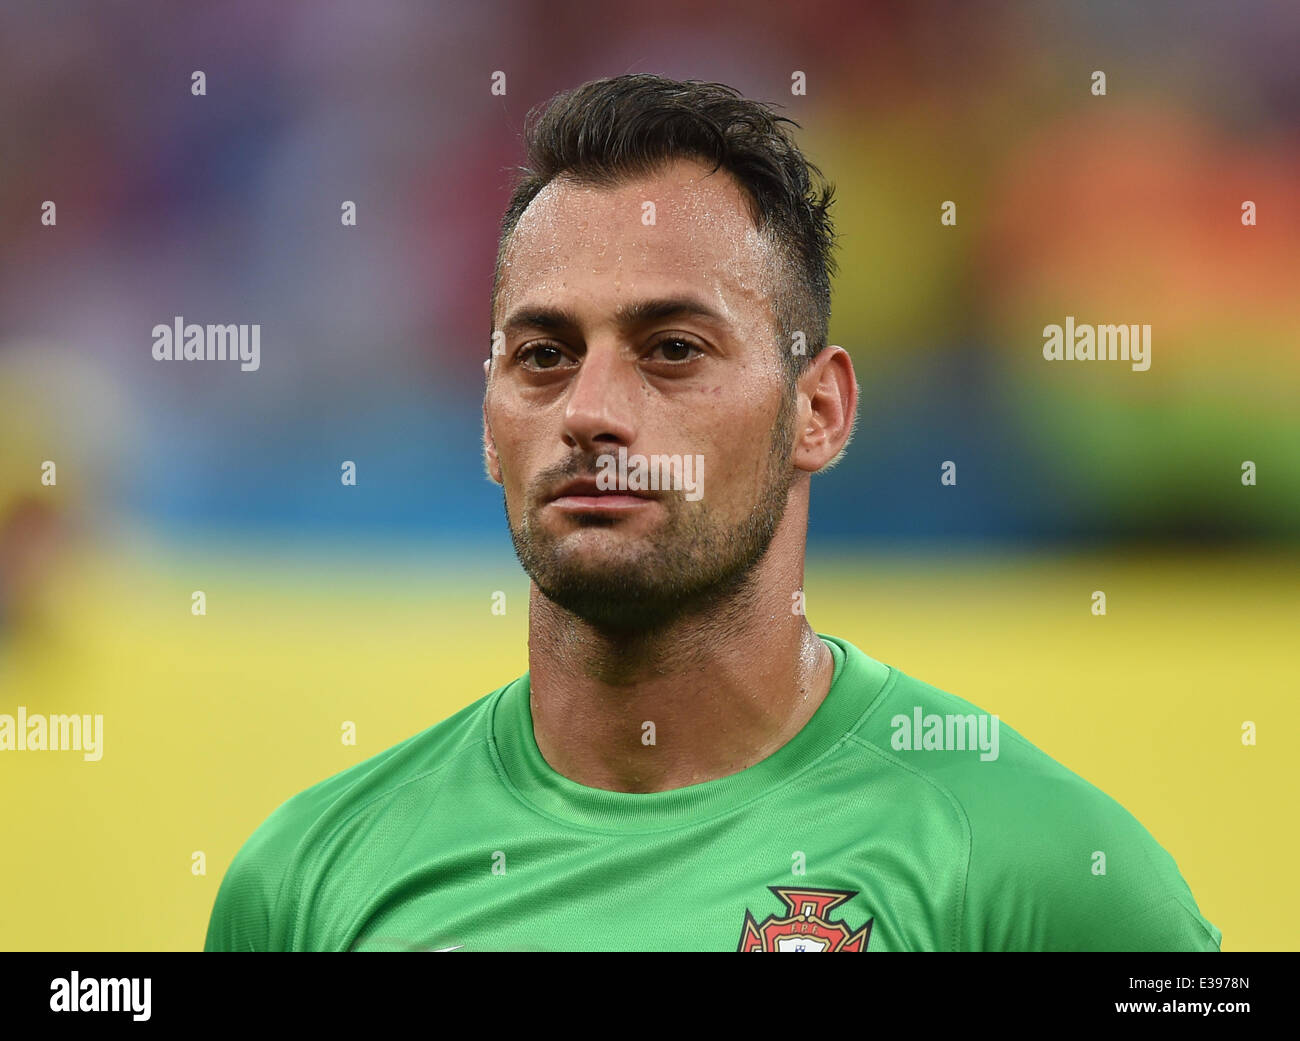 Manaus, Brazil. 22nd June, 2014. Goalkeeper Beto of Portugal seen during the national anthem prior to the FIFA World Cup 2014 group G preliminary round match between the USA and Portugal at the Arena Amazonia Stadium in Manaus, Brazil, 22 June 2014. Photo: Marius Becker/dpa/Alamy Live News Stock Photo